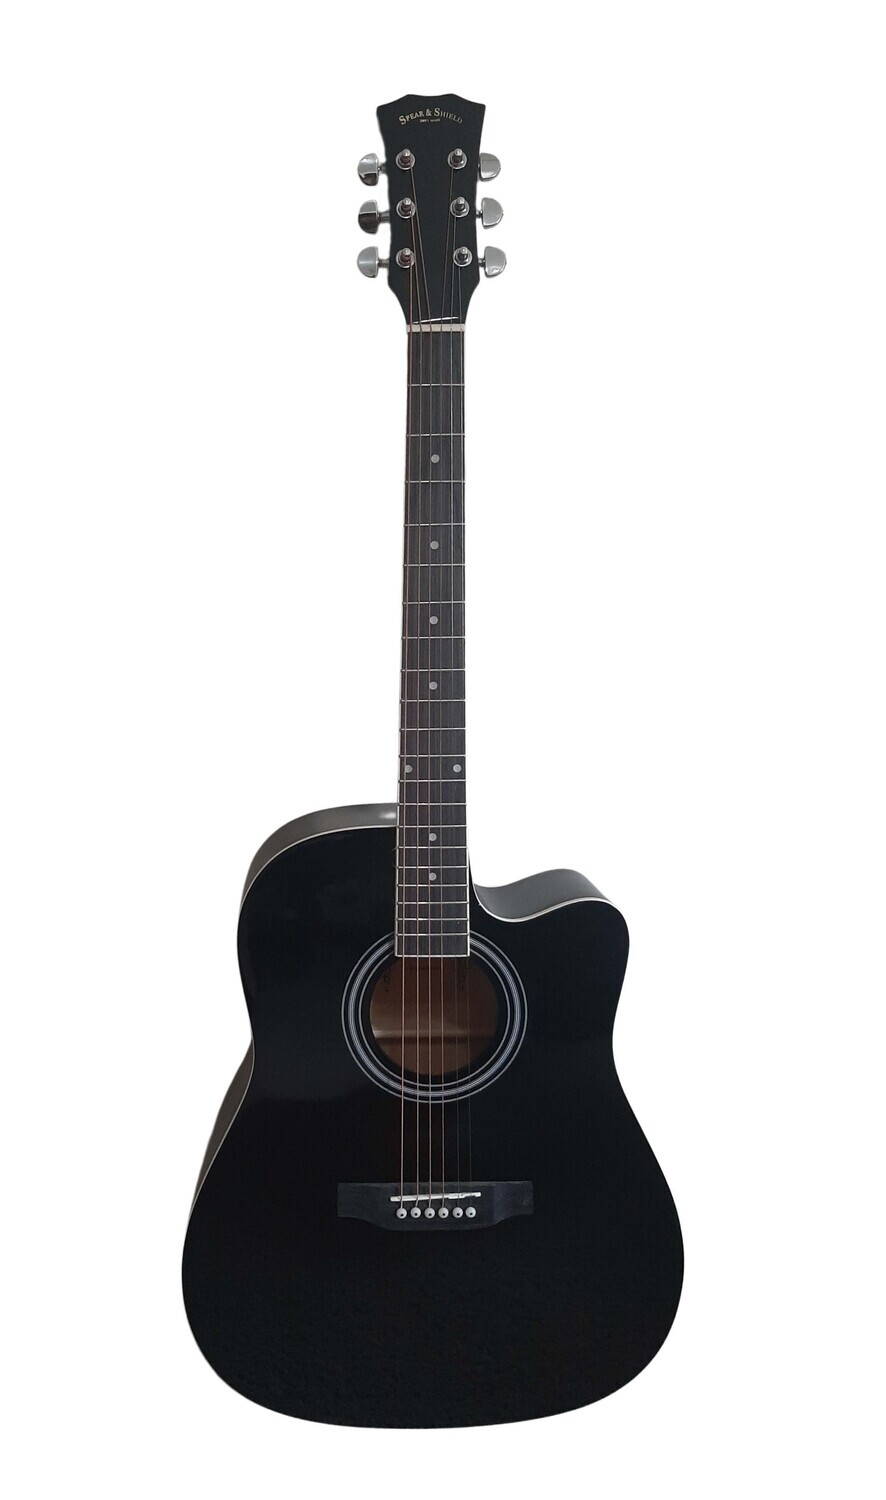 Spear & Shield Acoustic Guitar for Beginners Adults Students Intermediate players 41-inch full-size Dreadnought SPS373 Free Shipping